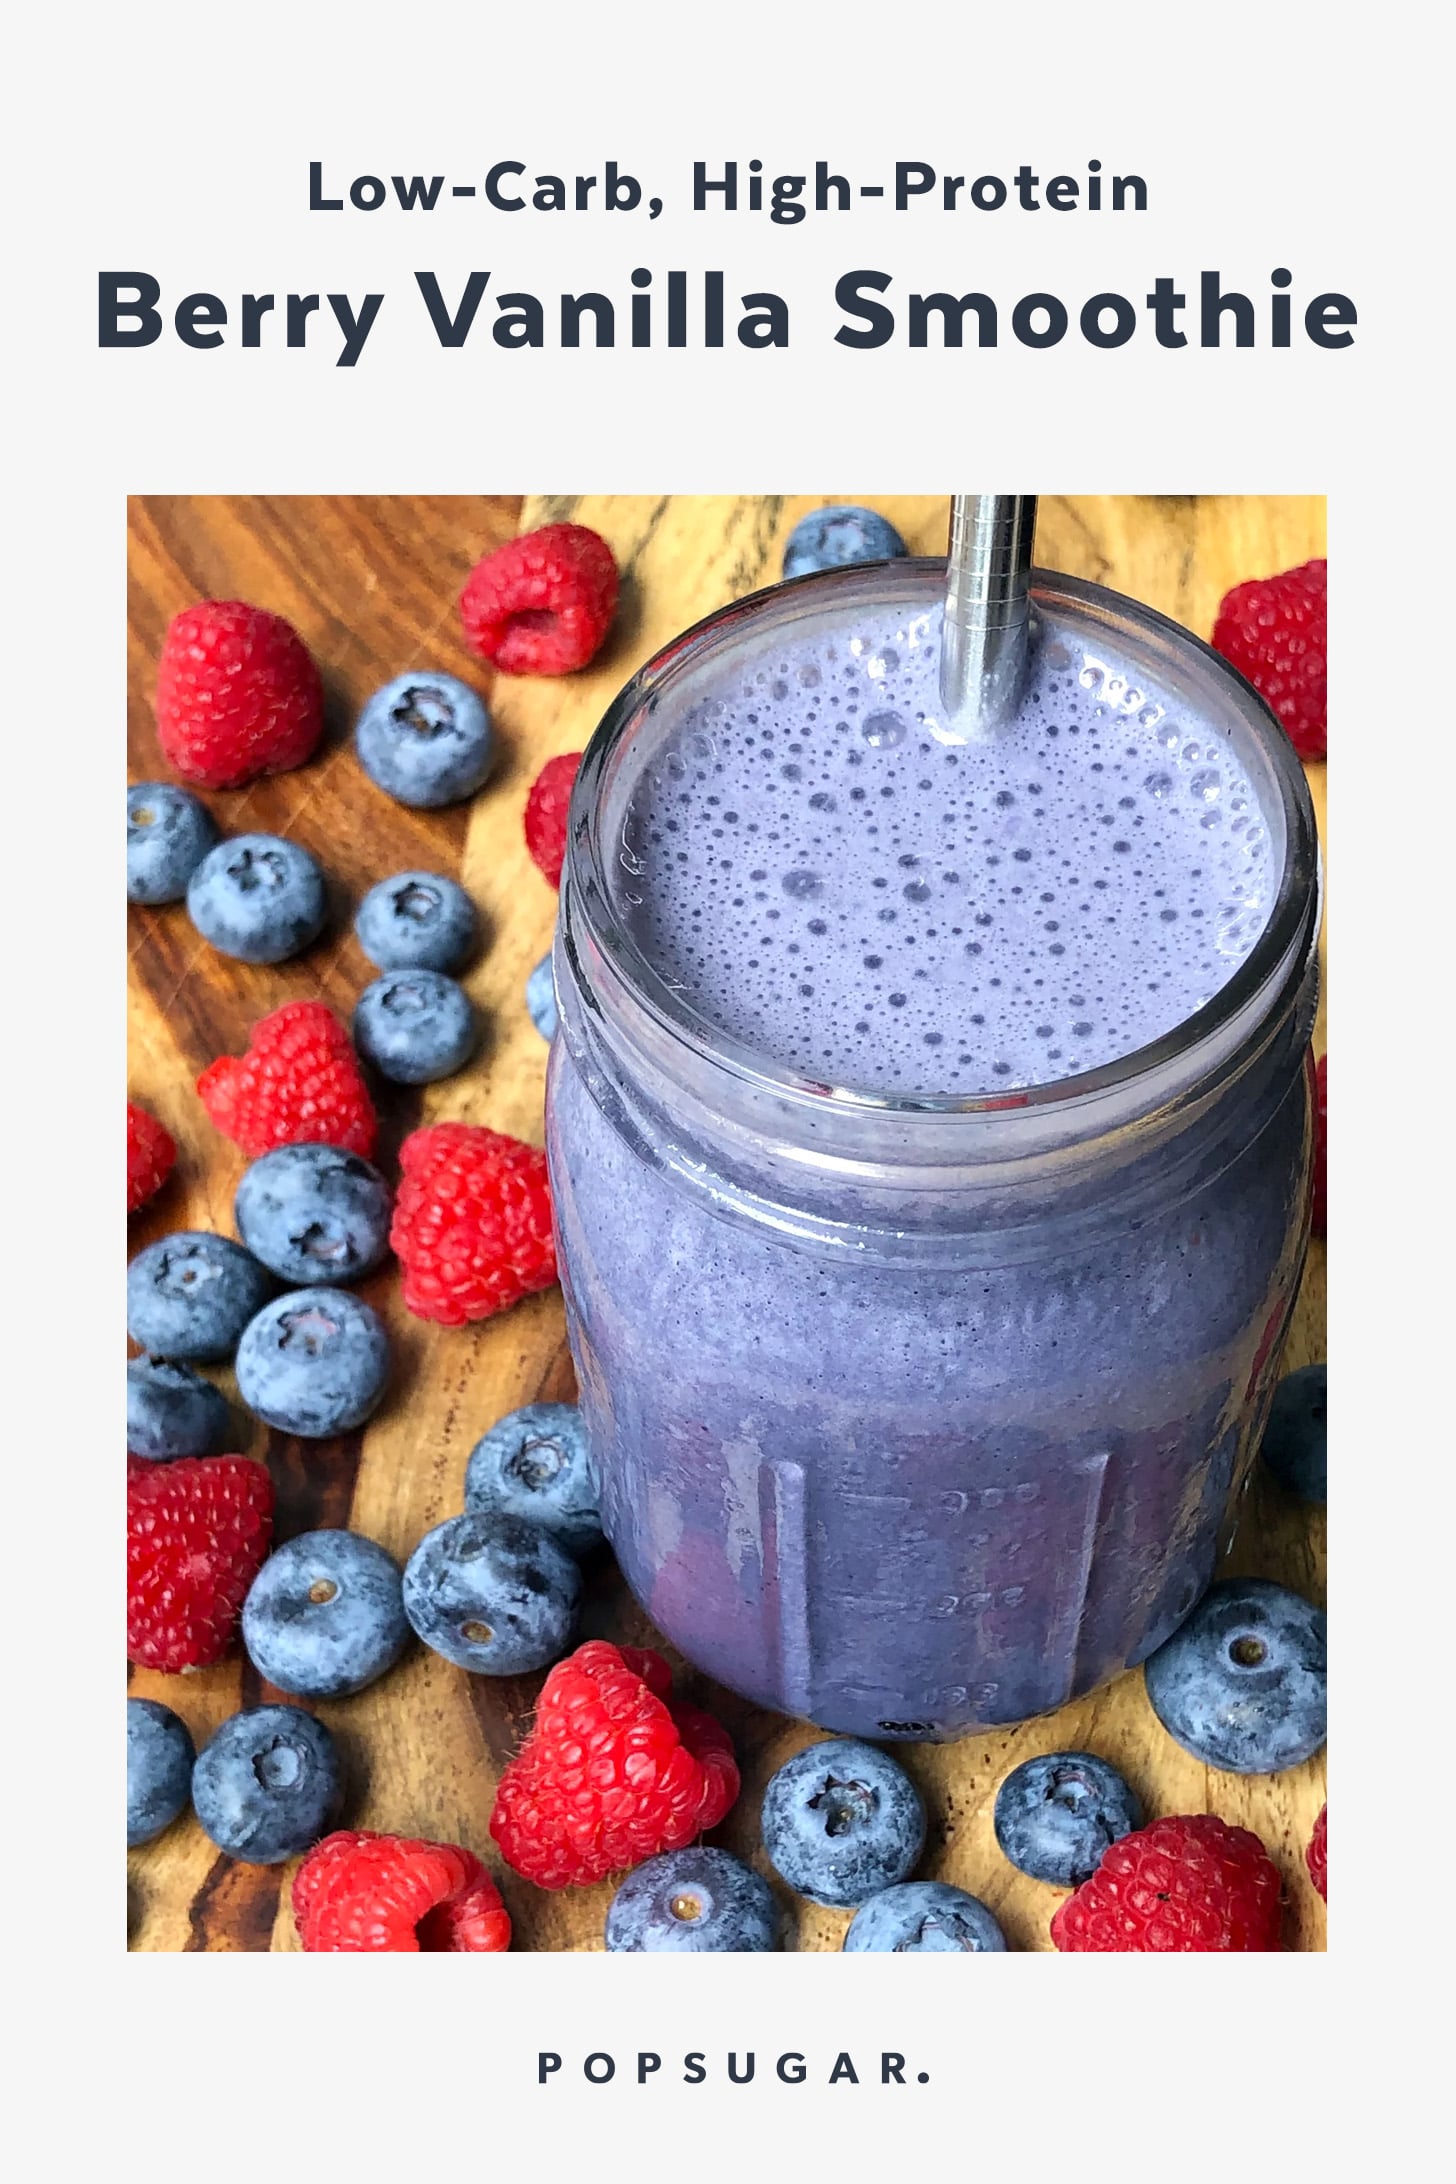 Low-Carb High-Protein Smoothie | POPSUGAR Fitness